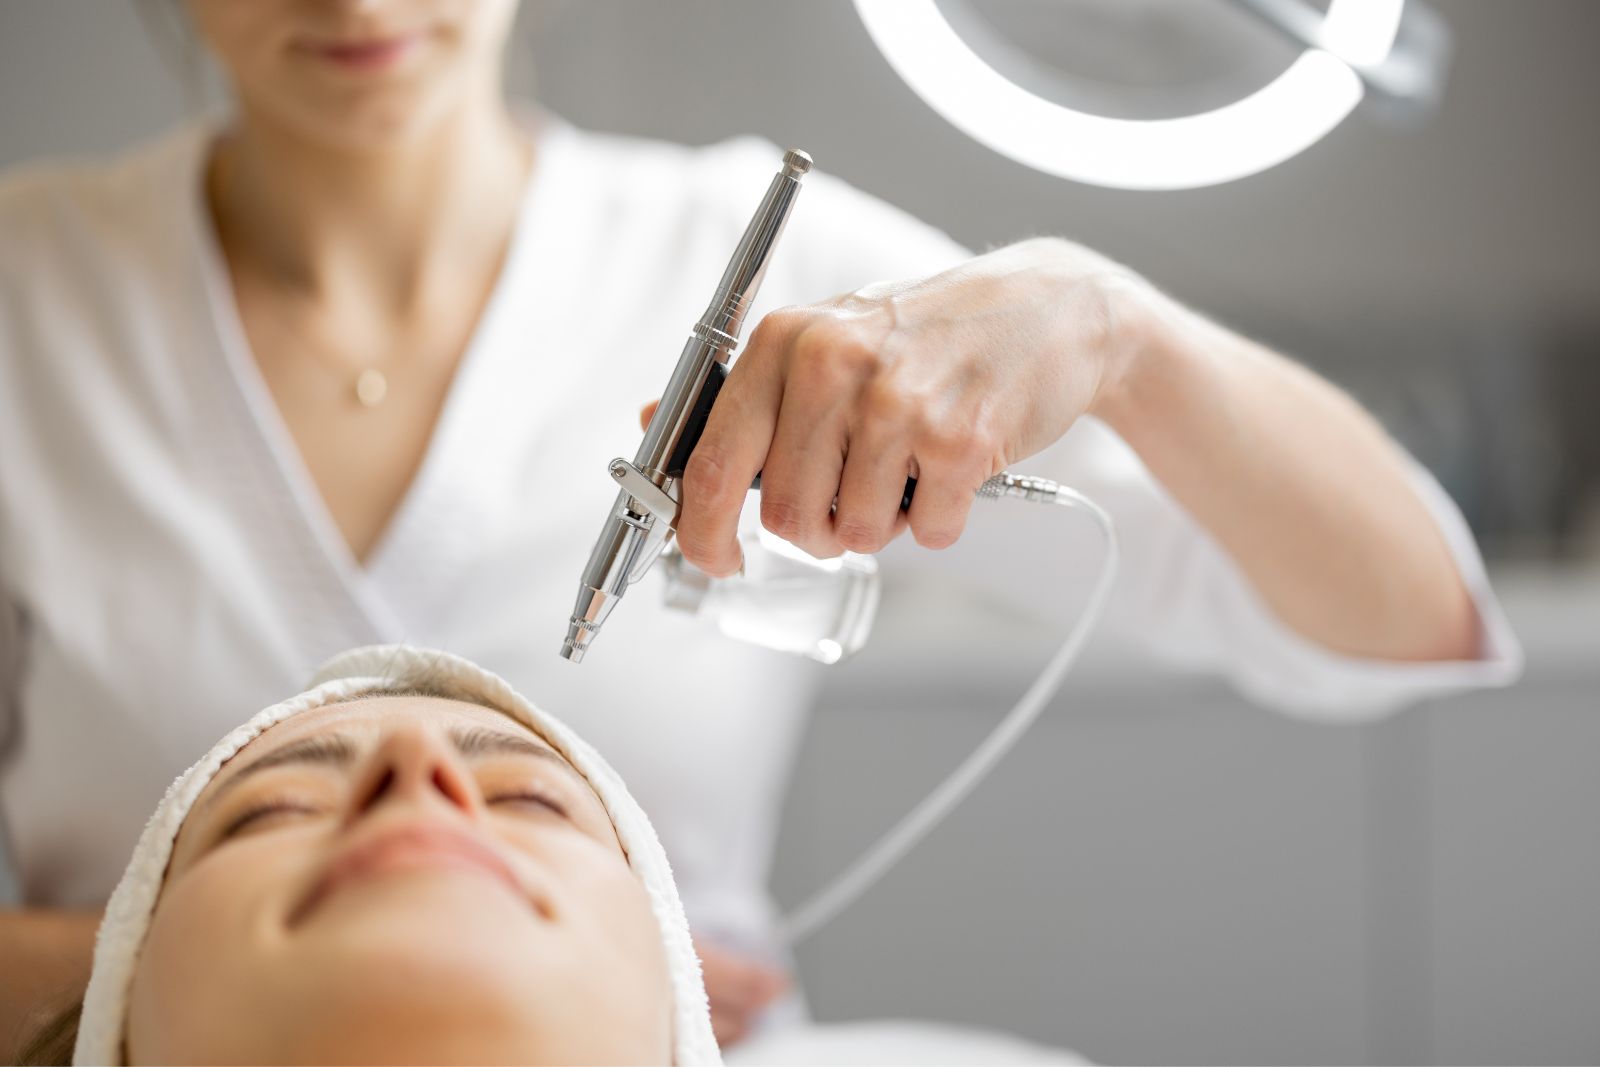 Aesthetician using a microneedling device on a female client's face during a skincare treatment in a well-lit clinic.